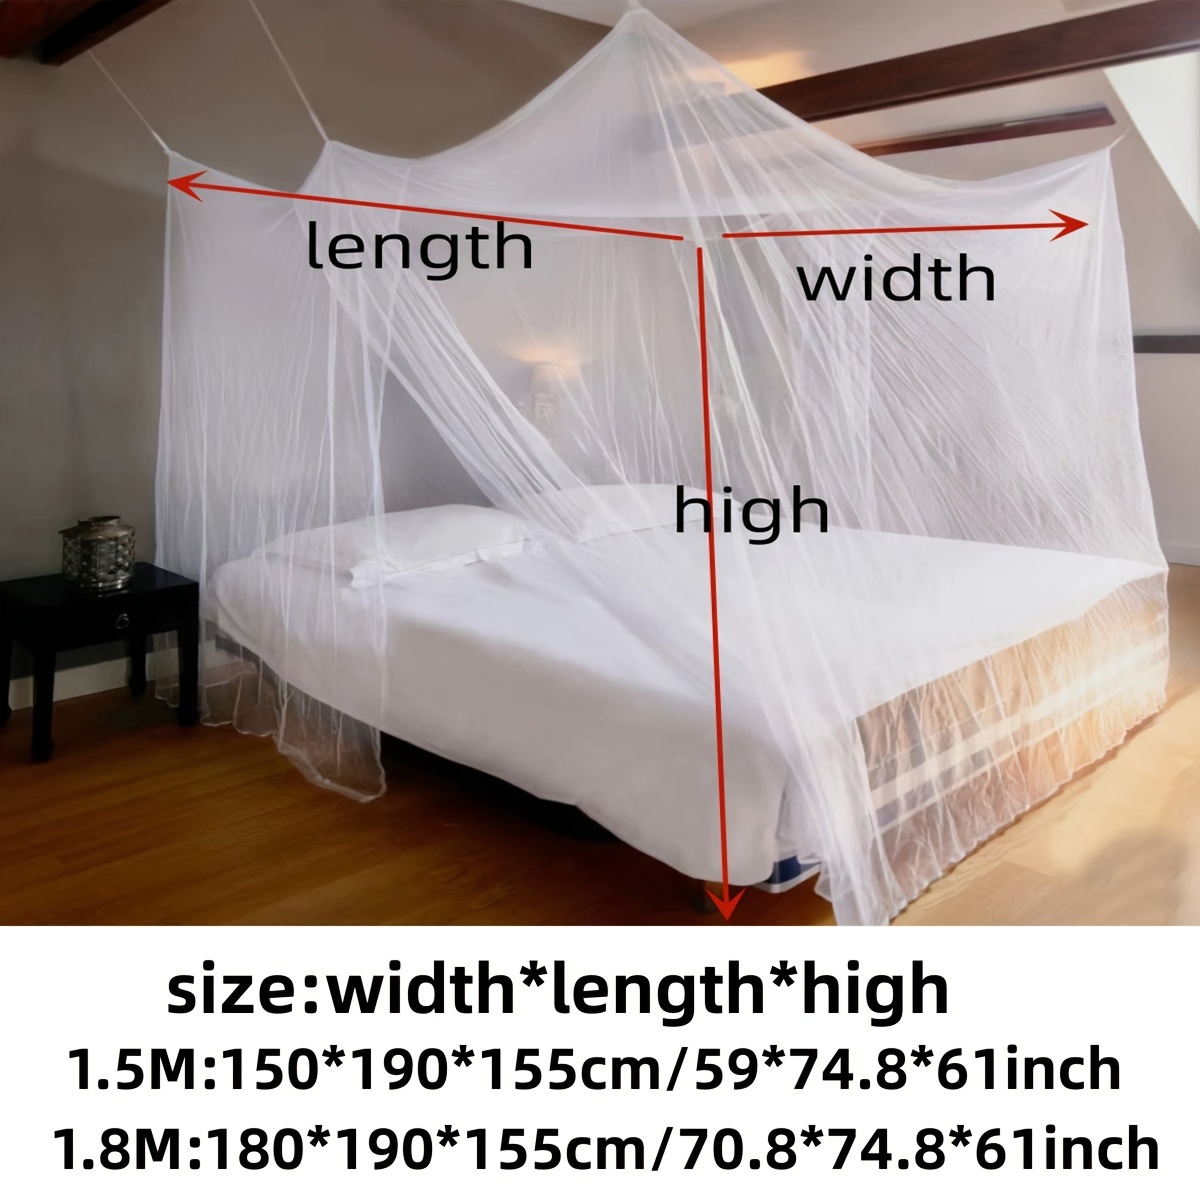 Mesh Tents for Camping & Mosquito Protection